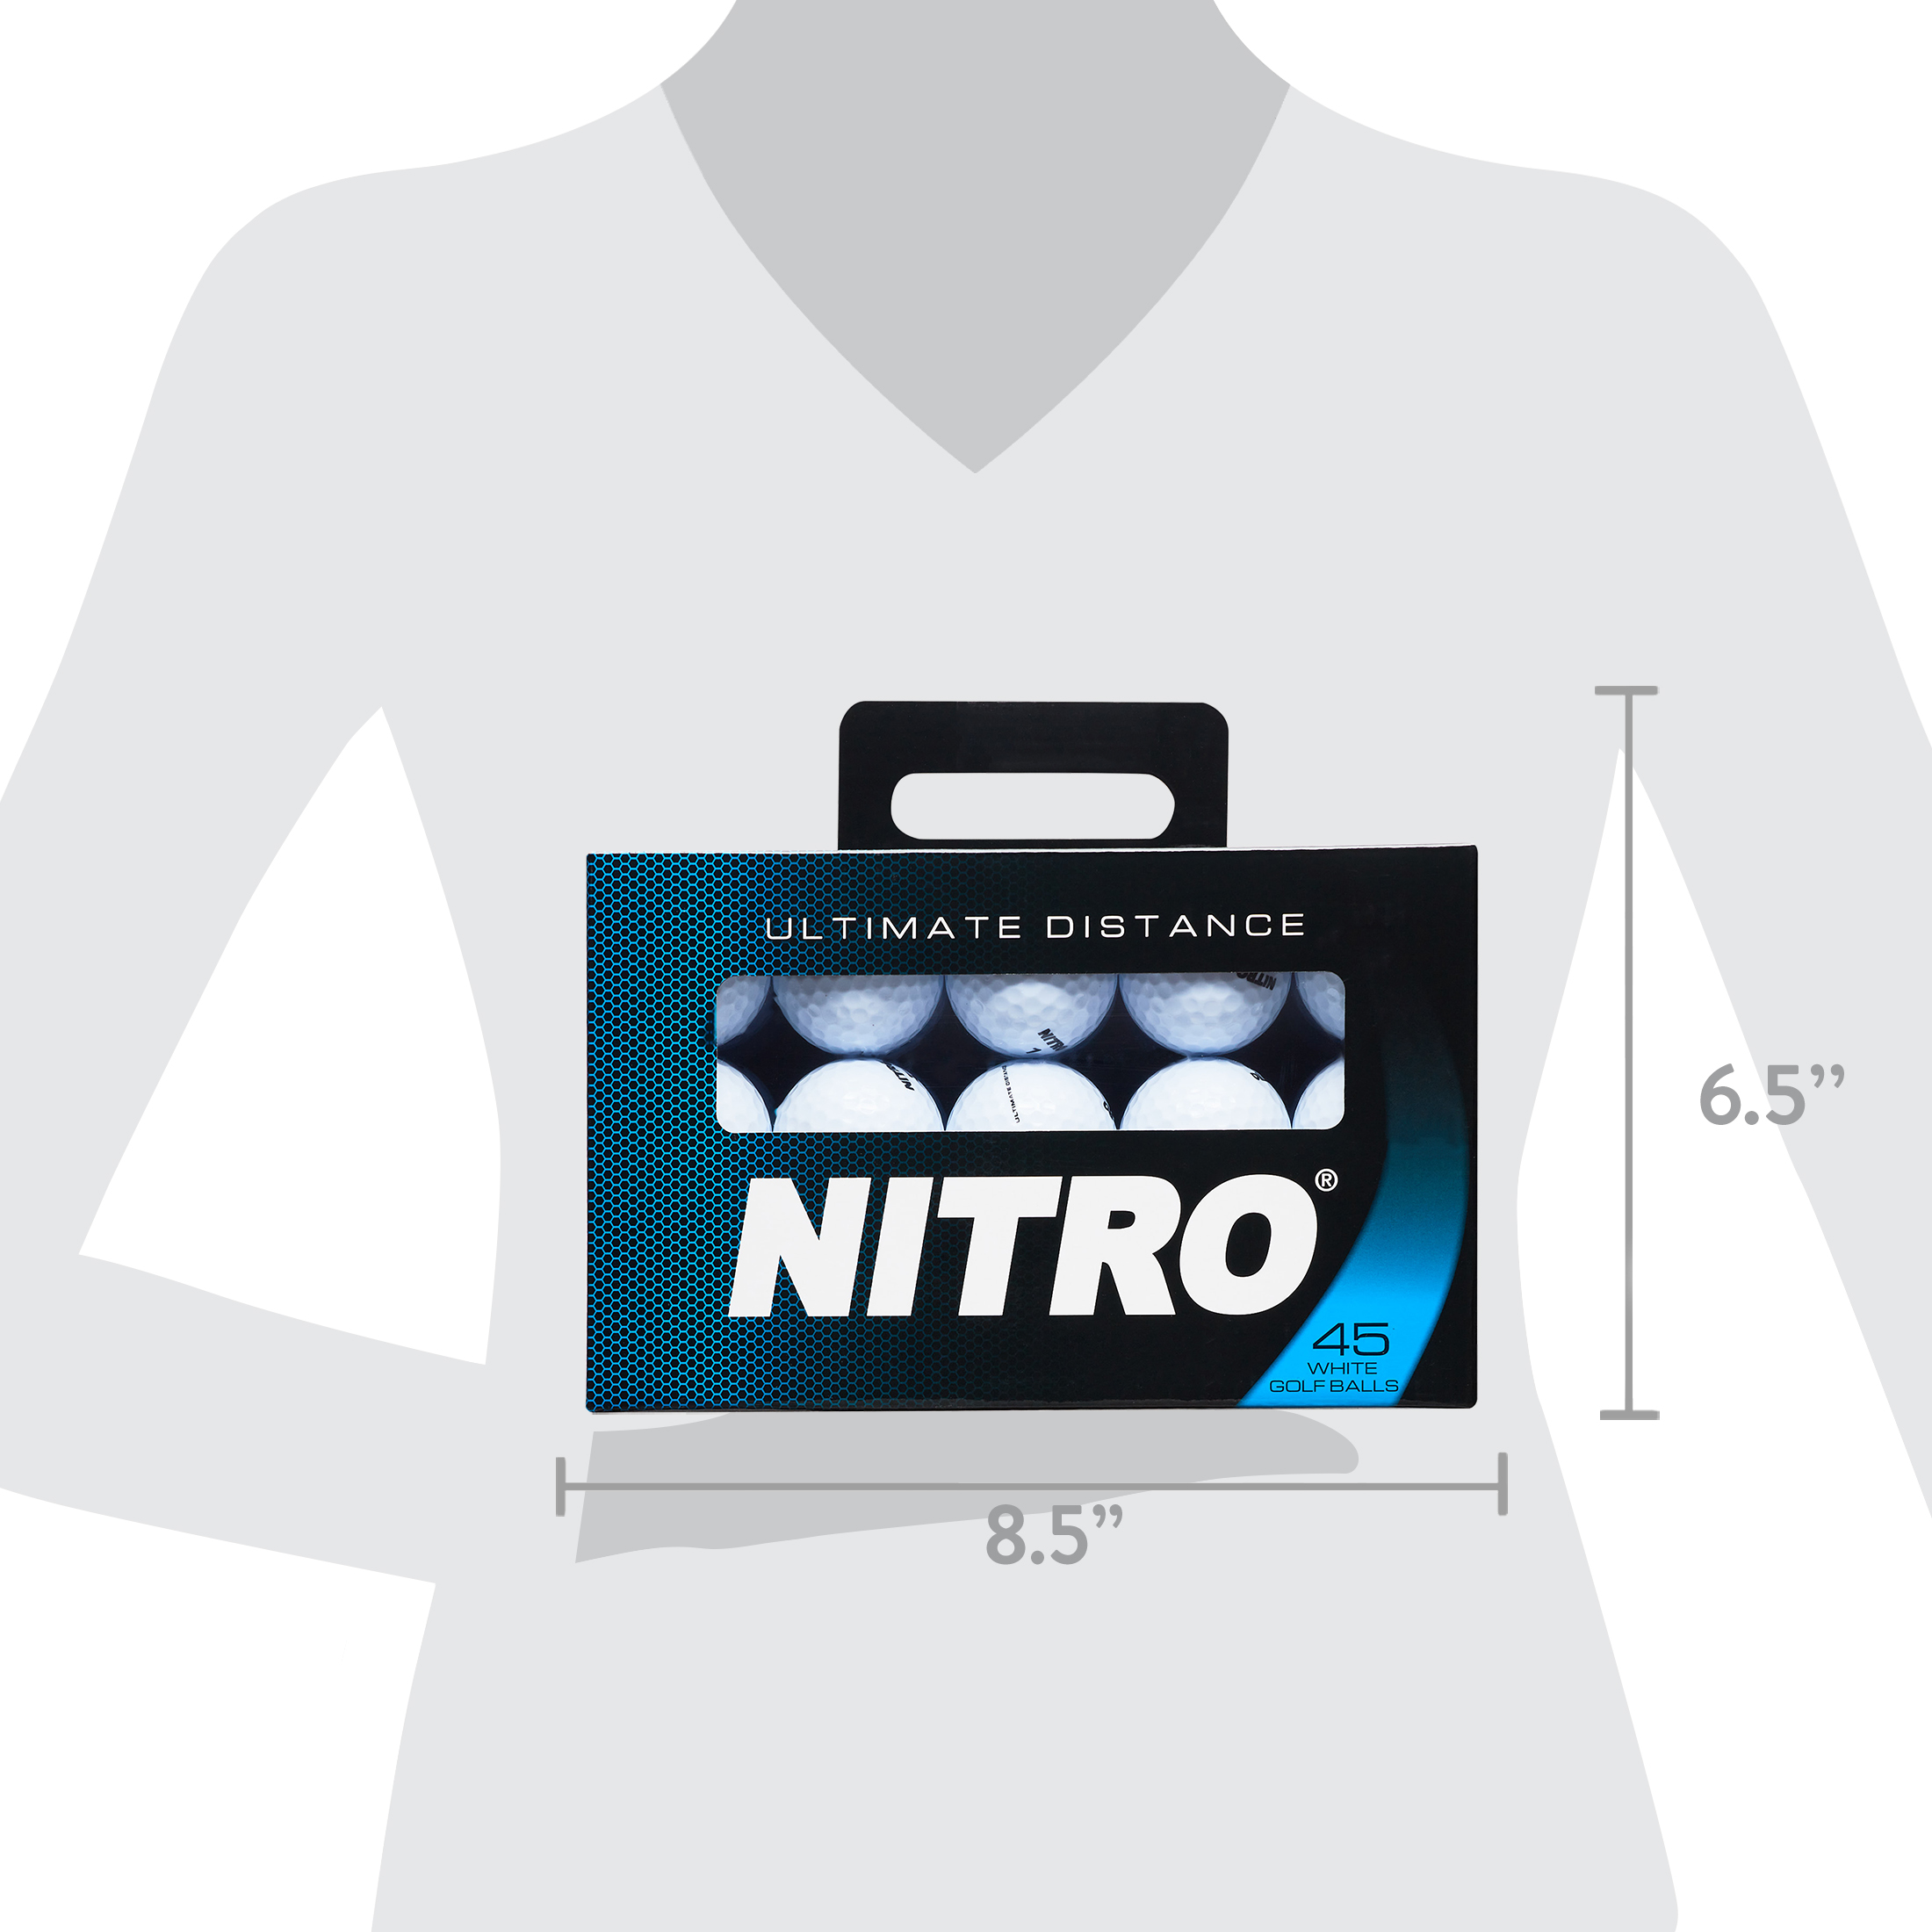 Nitro Golf Ultimate Distance Golf Balls, White, 45 Pack - image 4 of 4